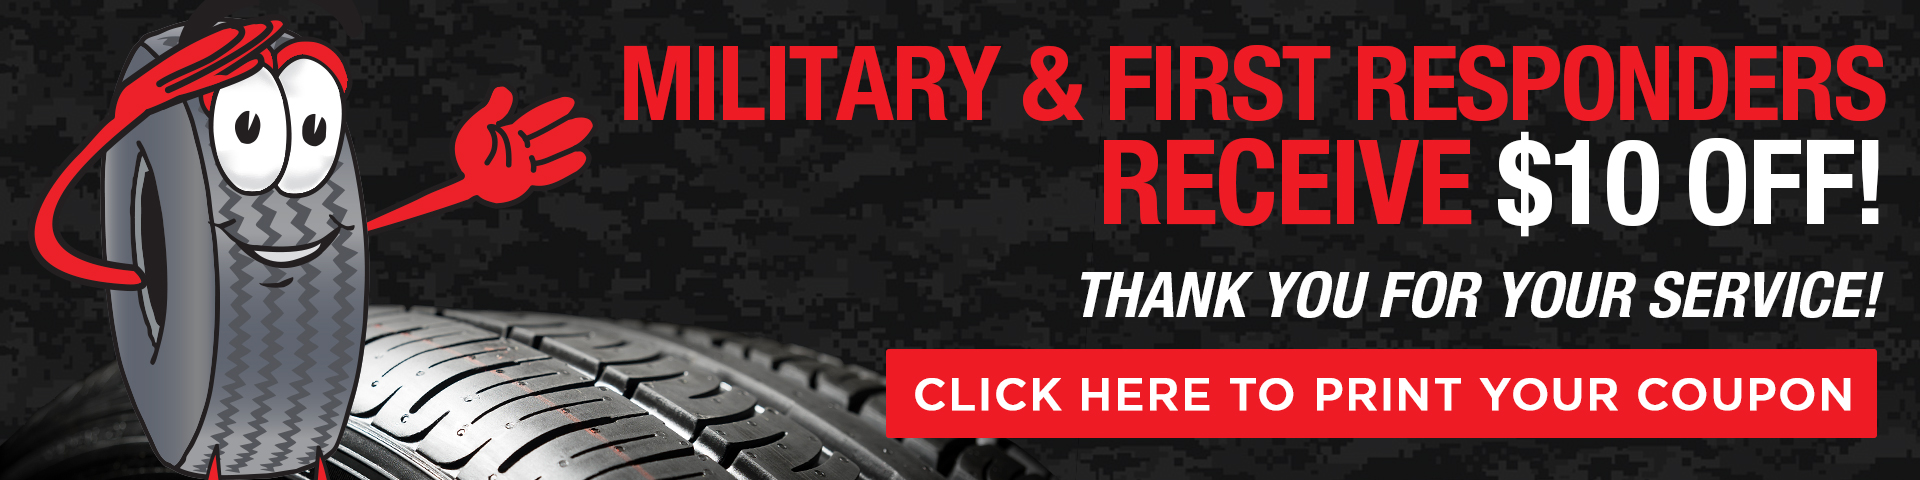 TP-Brake_Military-and-First-Responders_1920x480